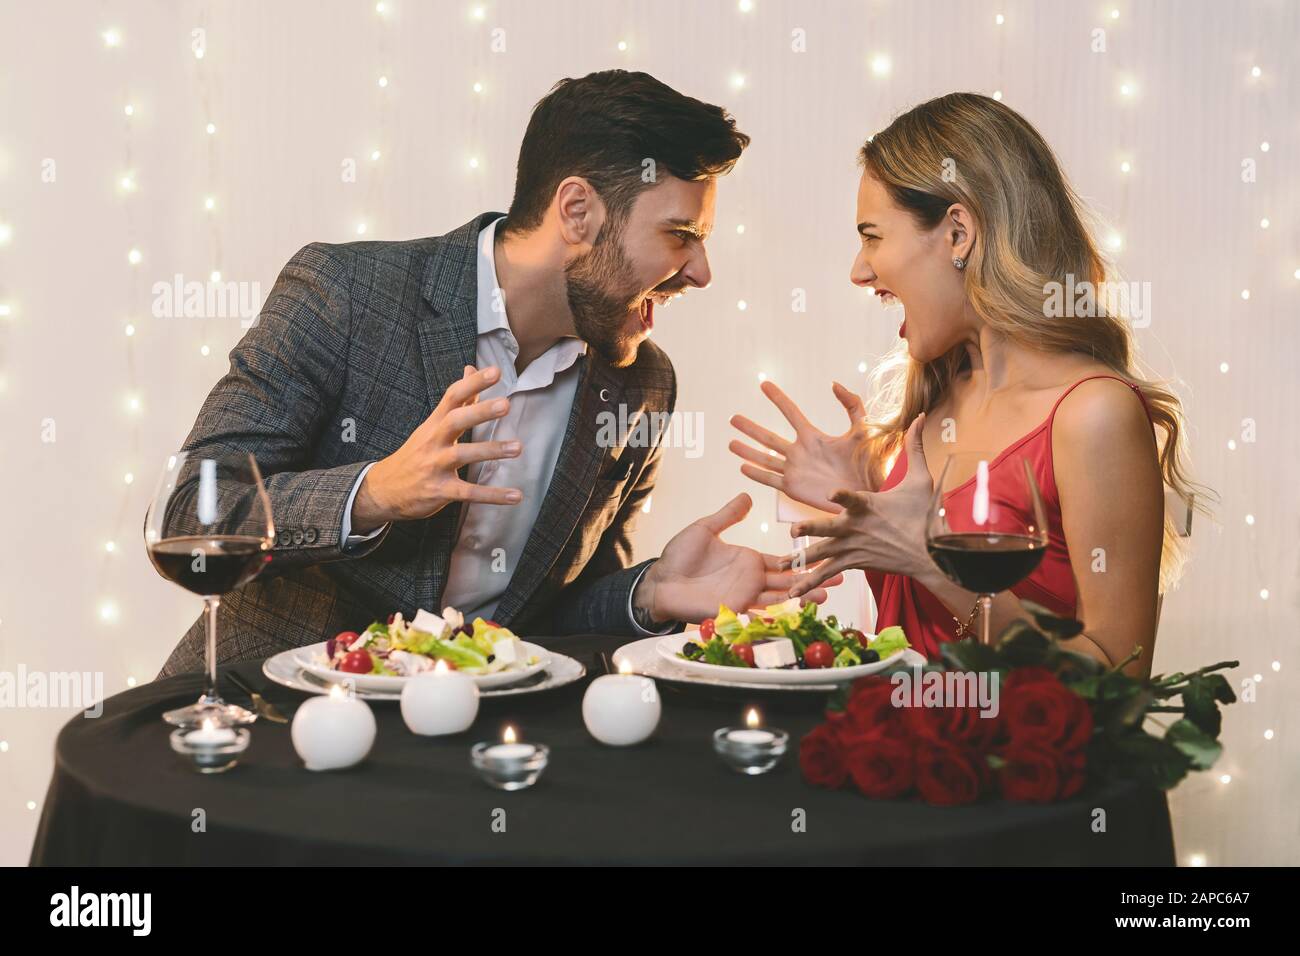 Angry couple arguing during romantic dinner in restaurant Stock Photo